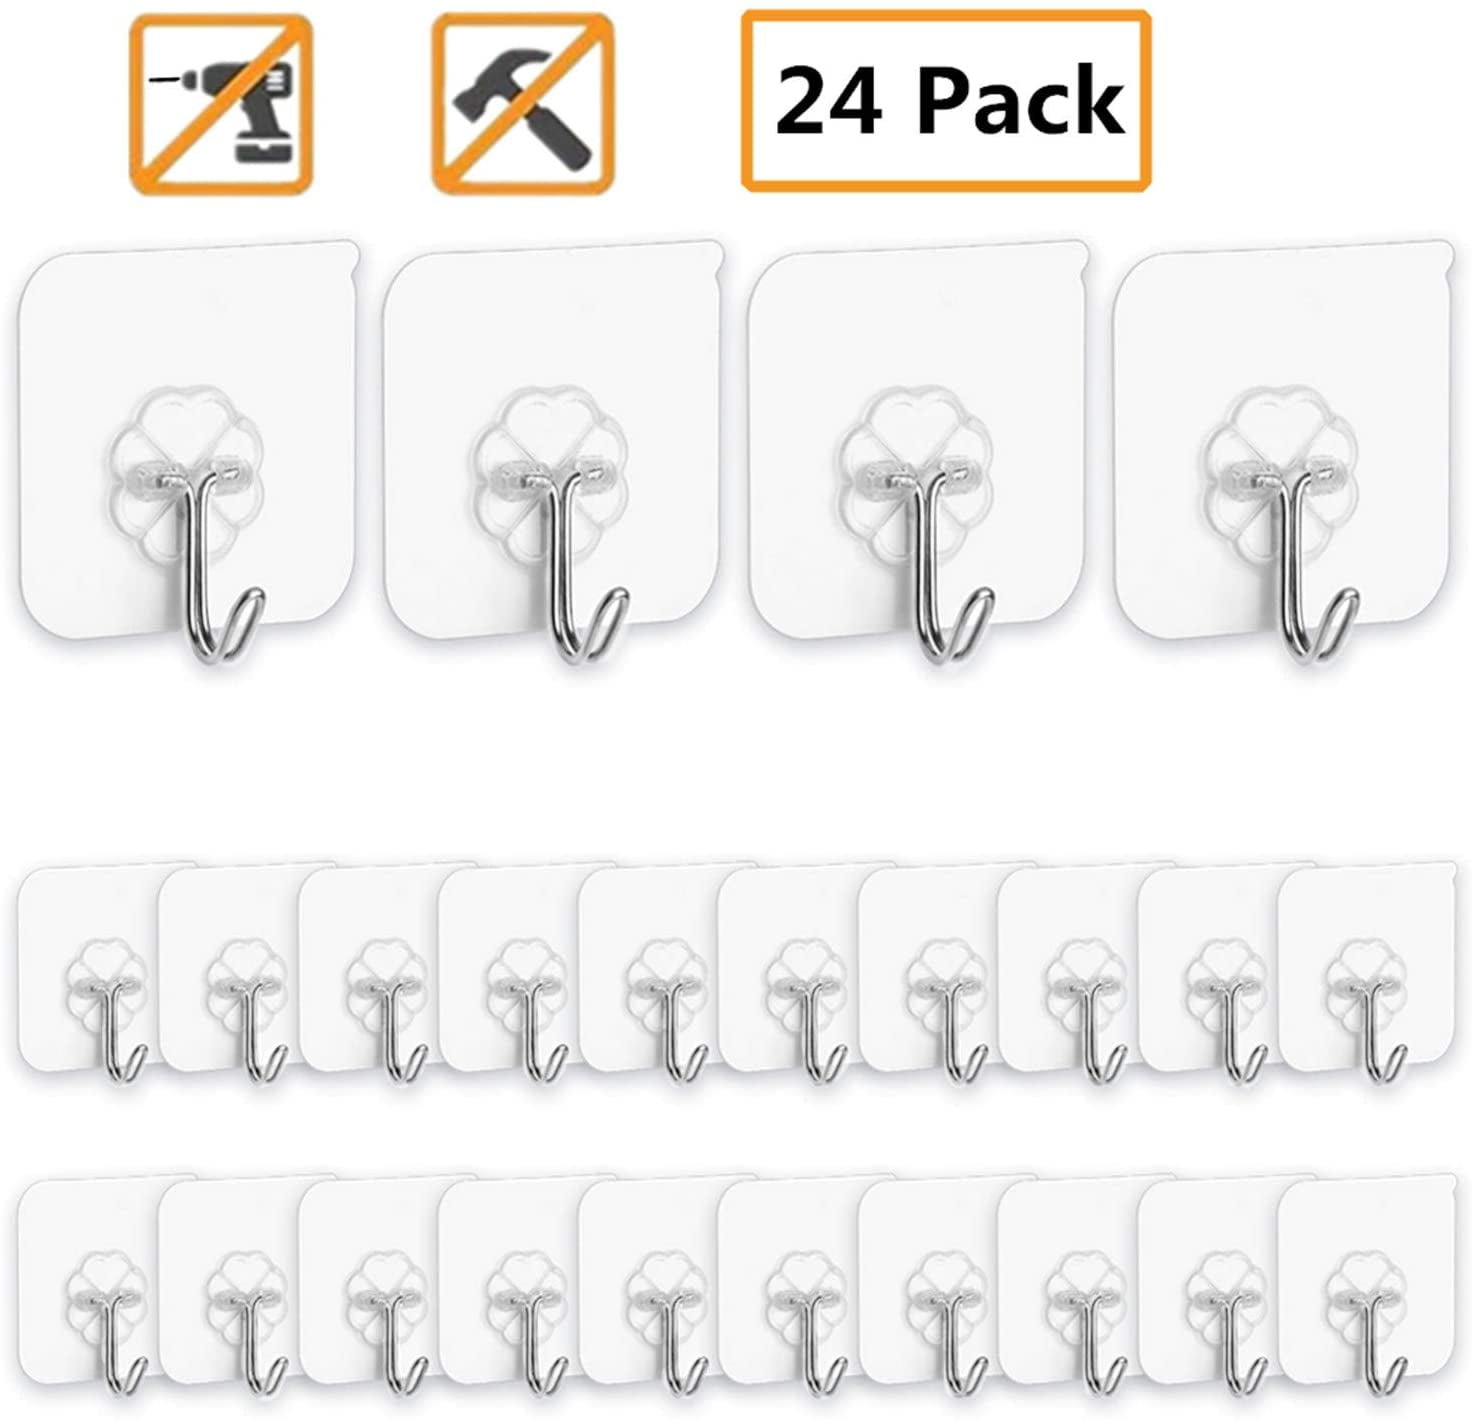 NeatEasy Wall Hooks (16 Count), Reusable Transparent Seamless Wall Hooks for Hanging, Hooks Heavy Duty 13lb (Max), Waterproof Shower Hooks, Adhesive